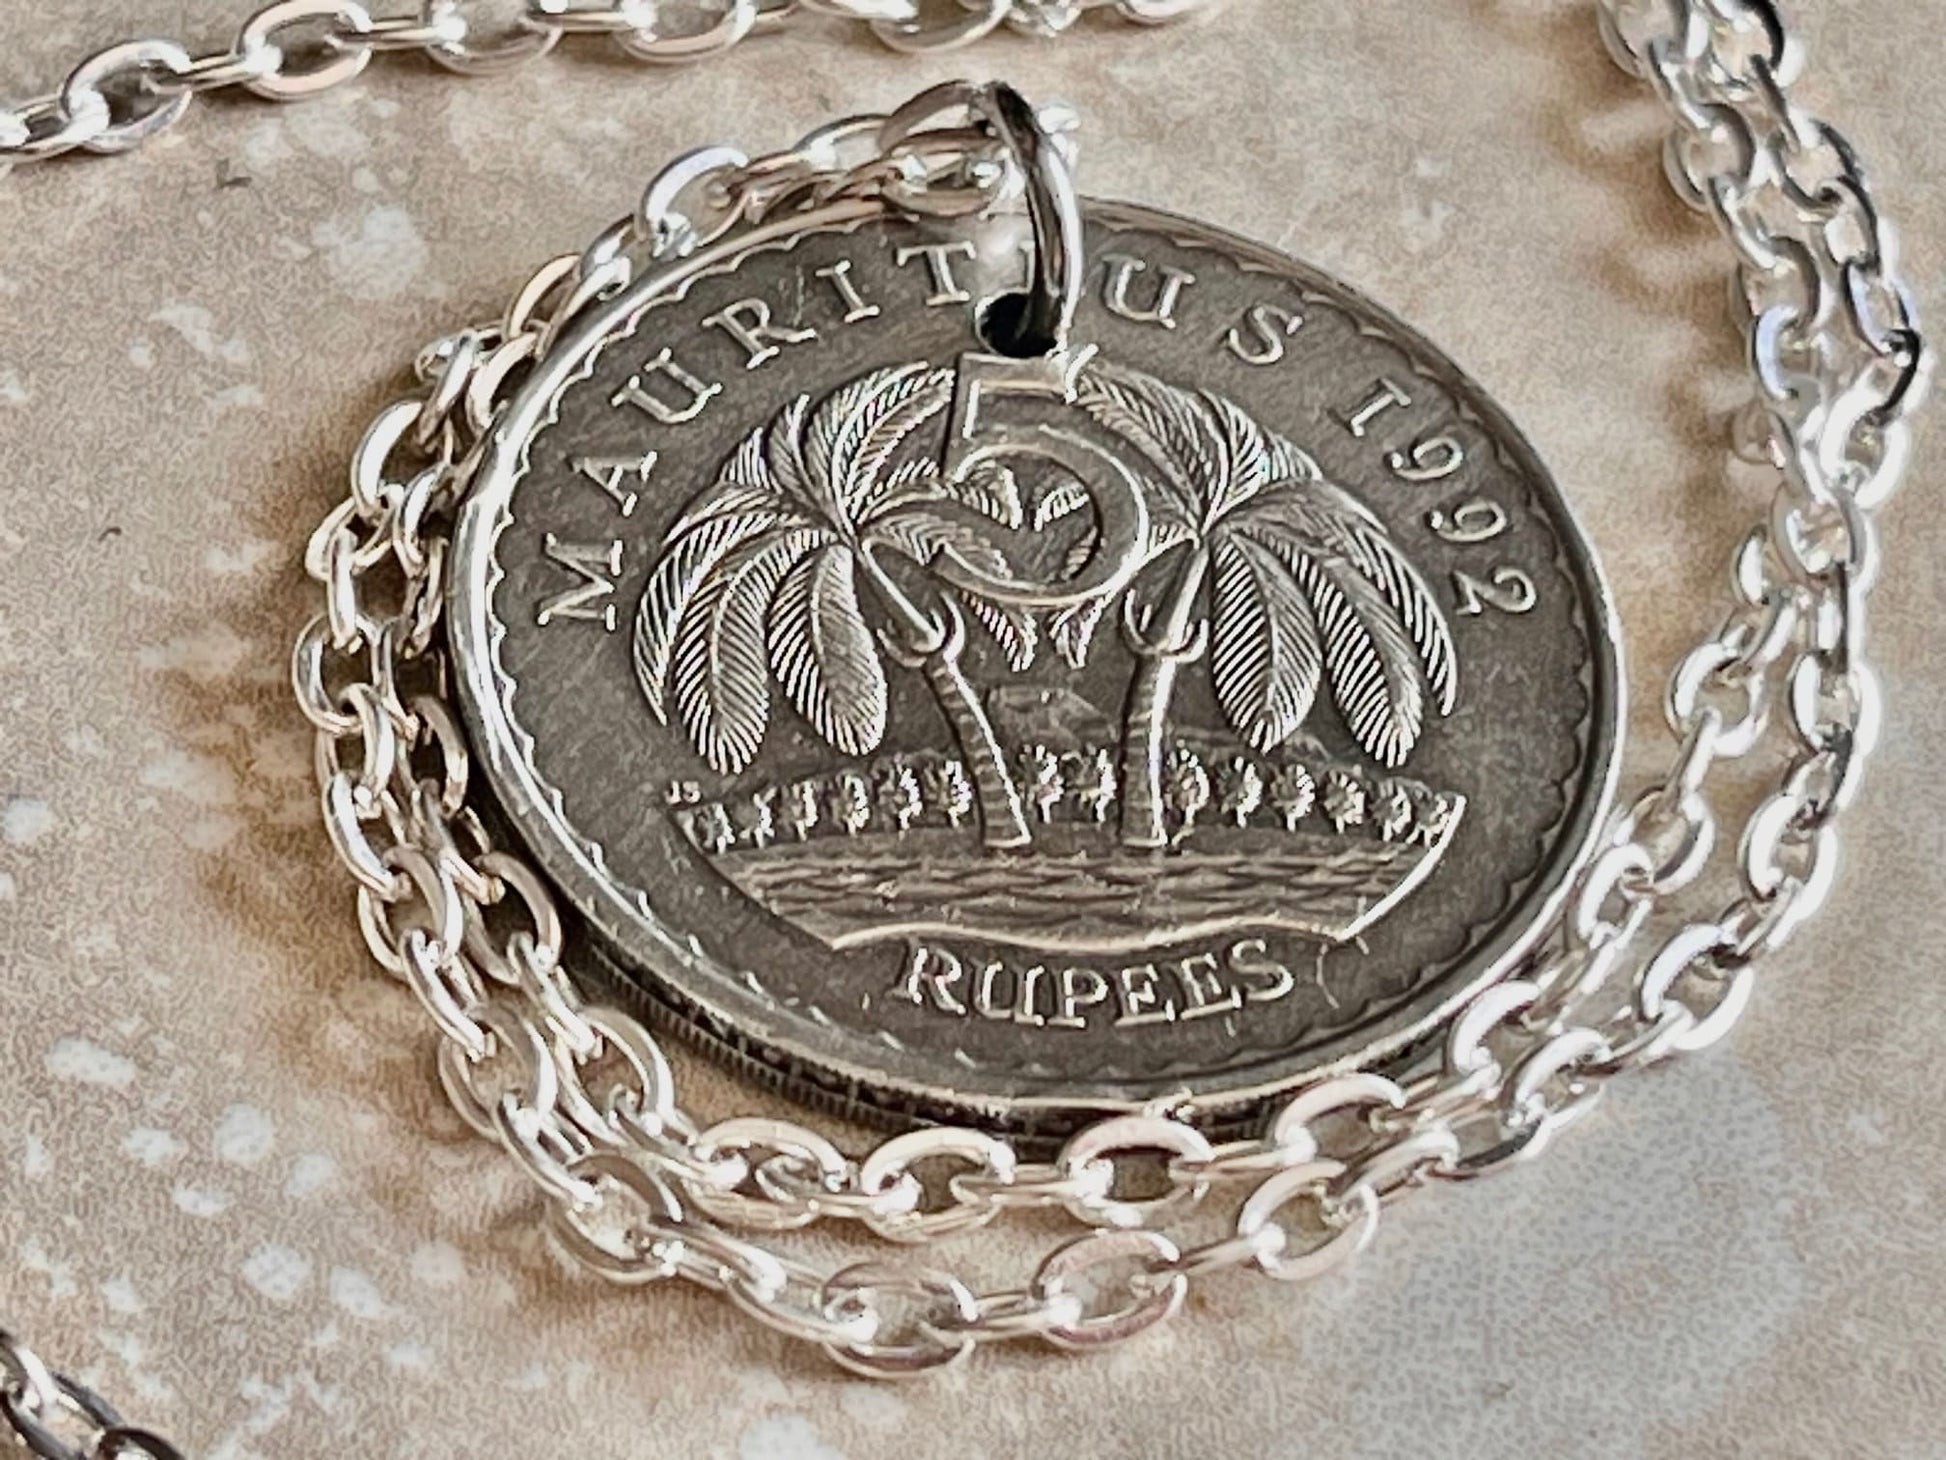 Mauritius Coin Pendant Five Rupee Coin Personal Necklace Old Vintage Handmade Jewelry Gift Friend Charm For Him Her World Coin Collector